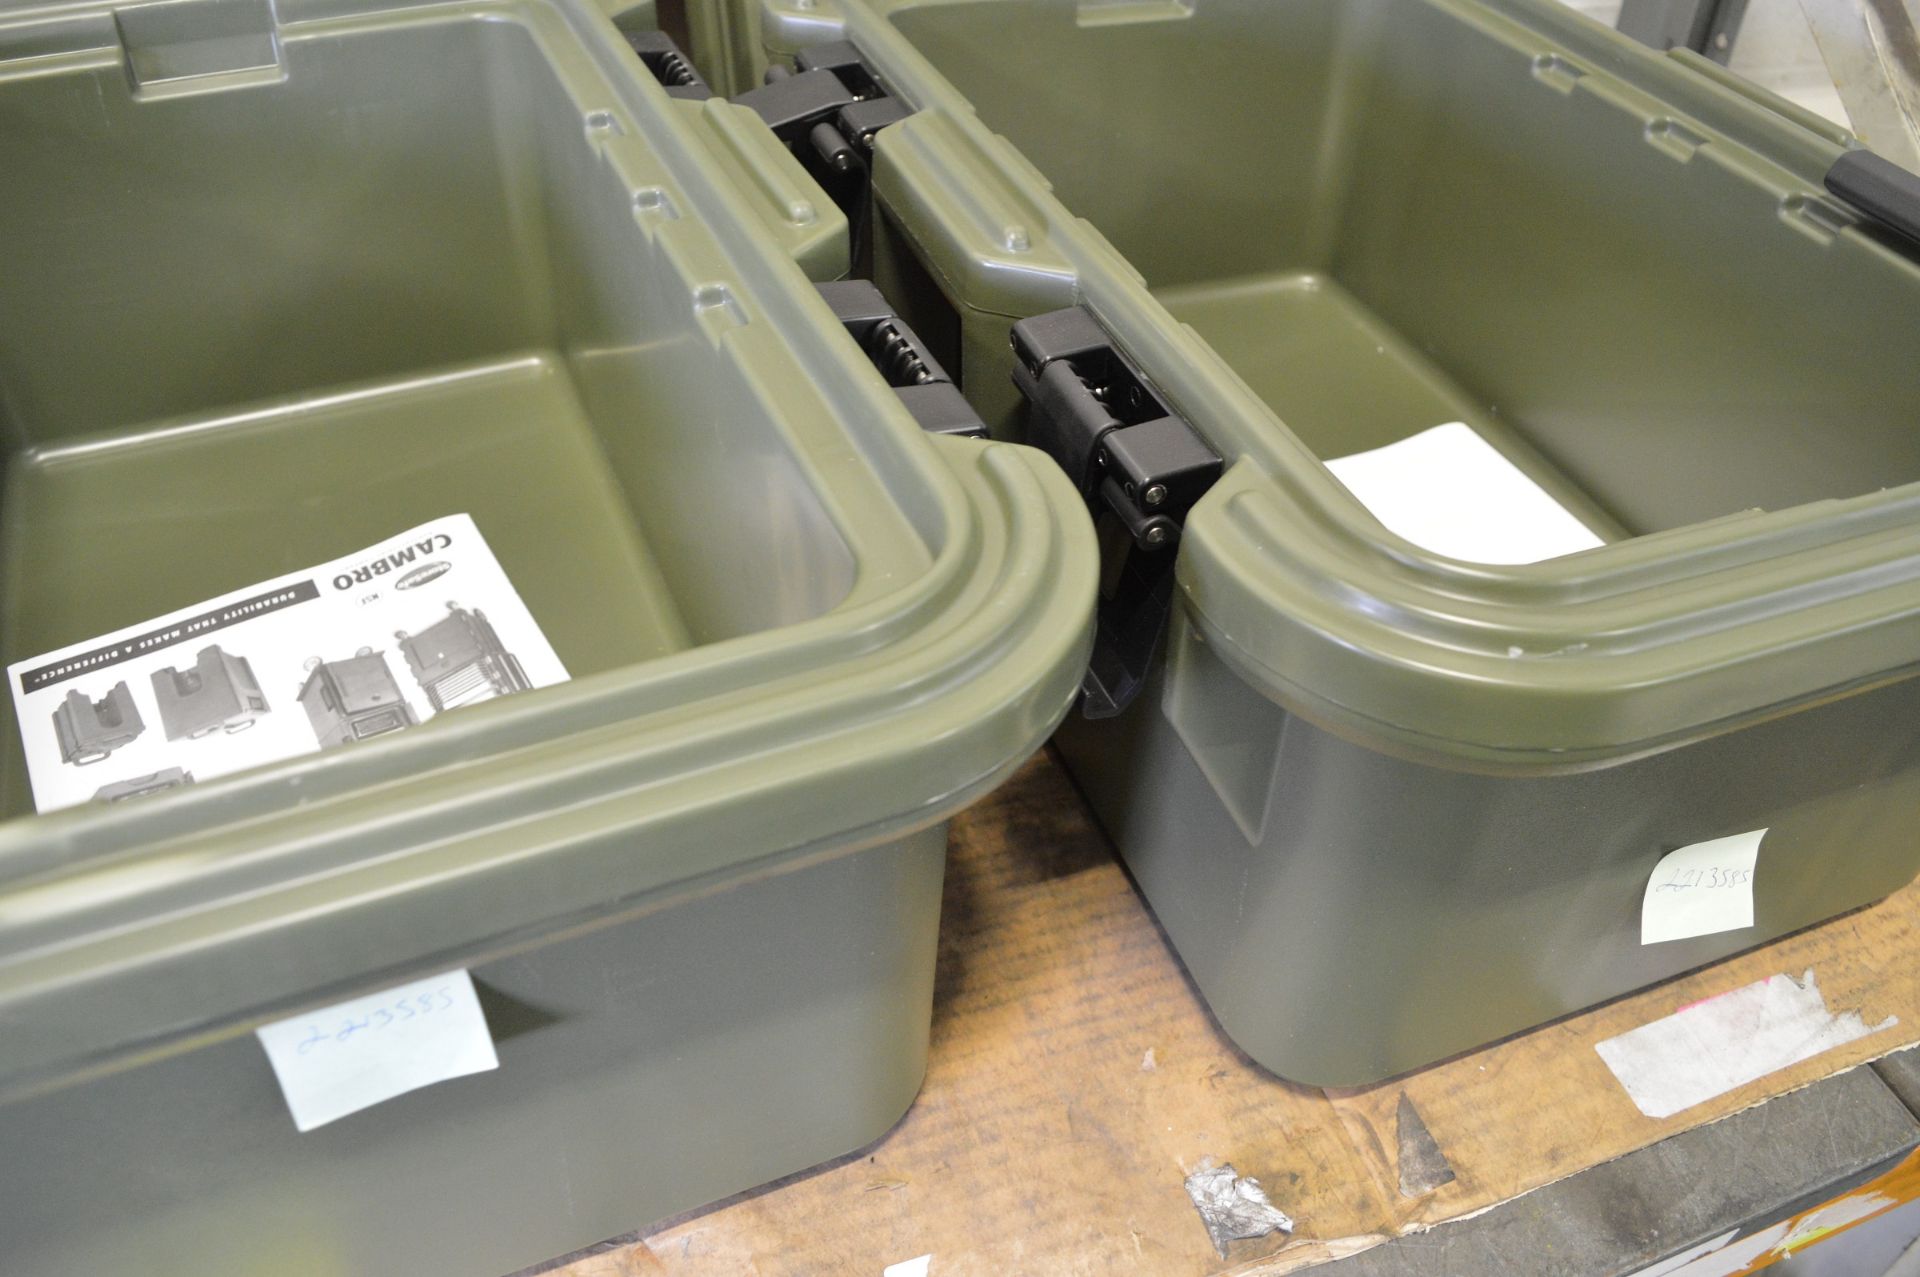 3x Cambro Green Empty Food Containers (insulated) - L650 x W44 x H32mm - Image 3 of 3